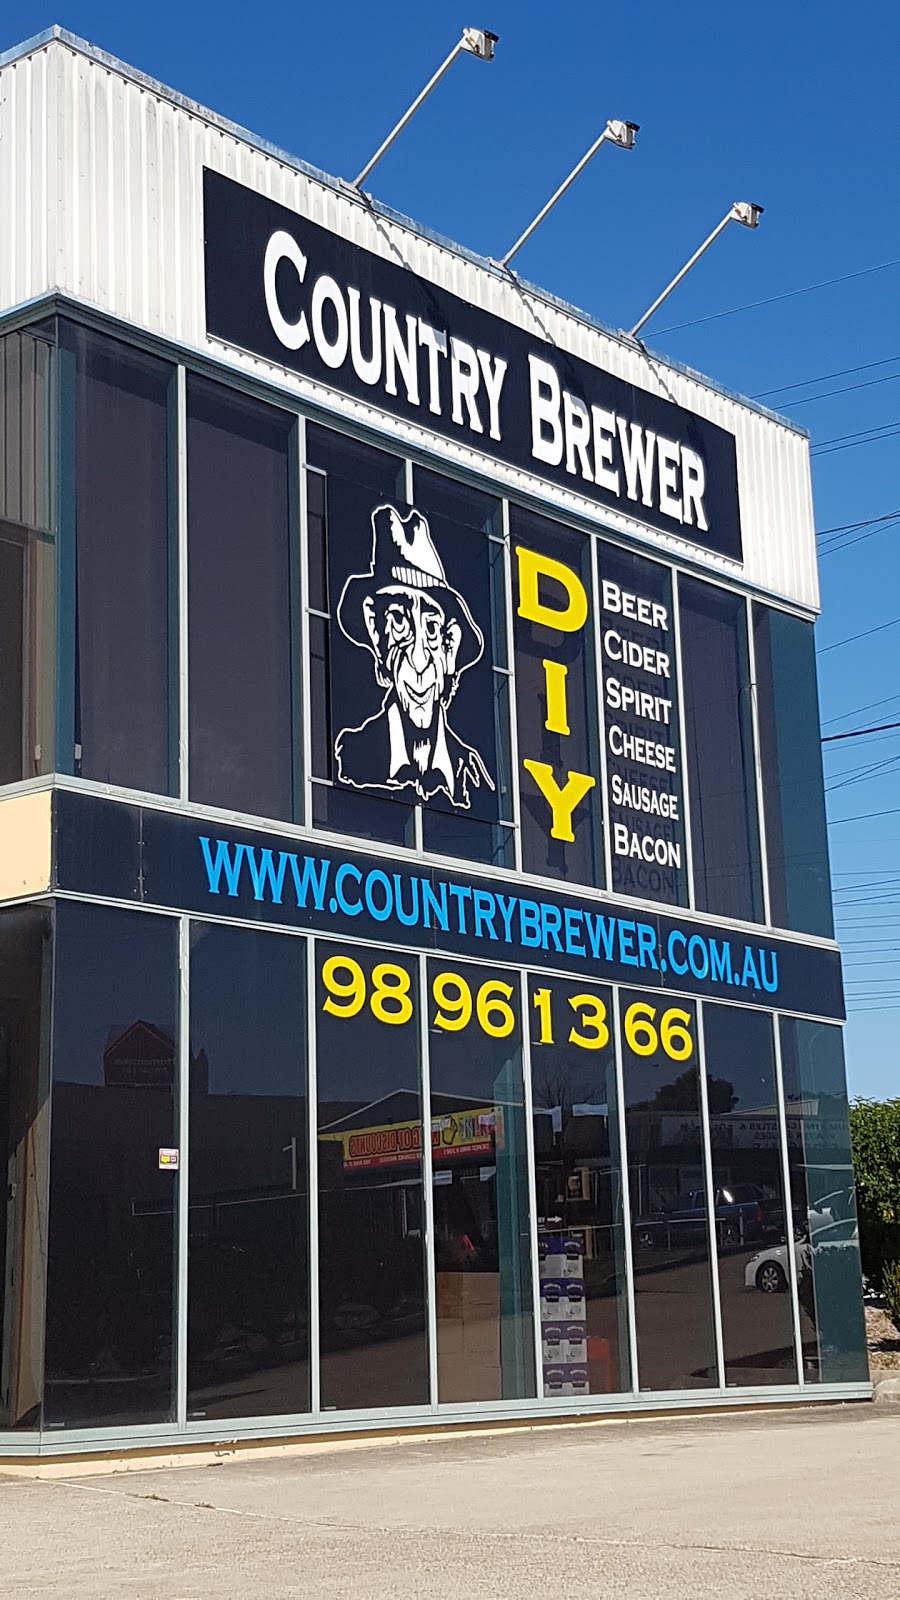 The Country Brewer | store | 4/22 Rowood Rd, Prospect NSW 2148, Australia | 0298961366 OR +61 2 9896 1366